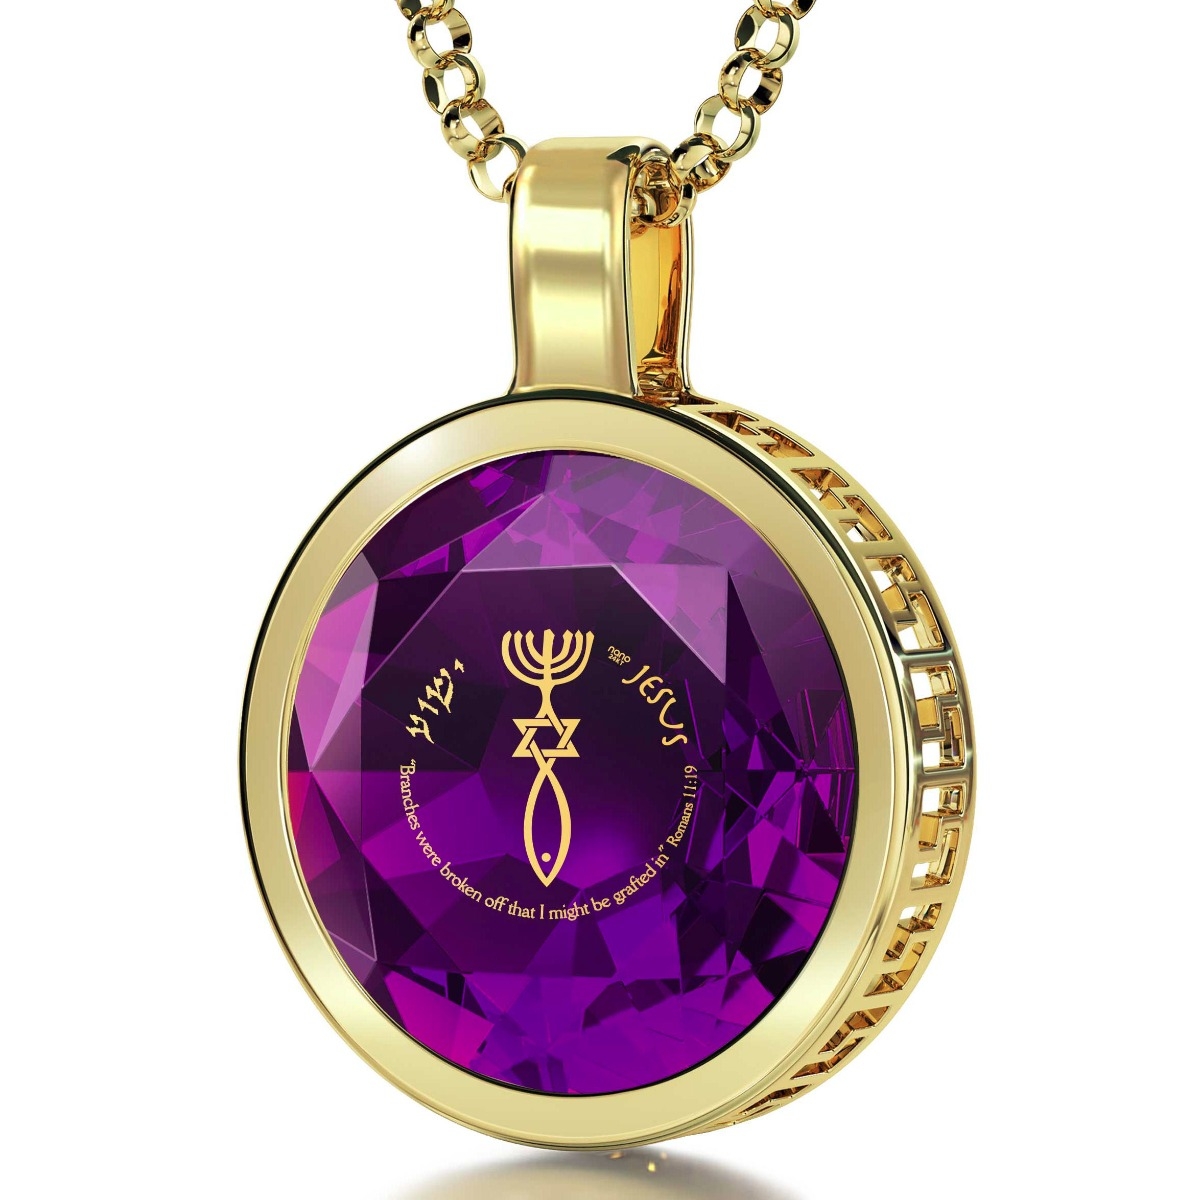 Nano 24K Gold Plated and Gemstone Grafted-In Necklace with 24K Gold Micro-Inscription (Purple) - 1